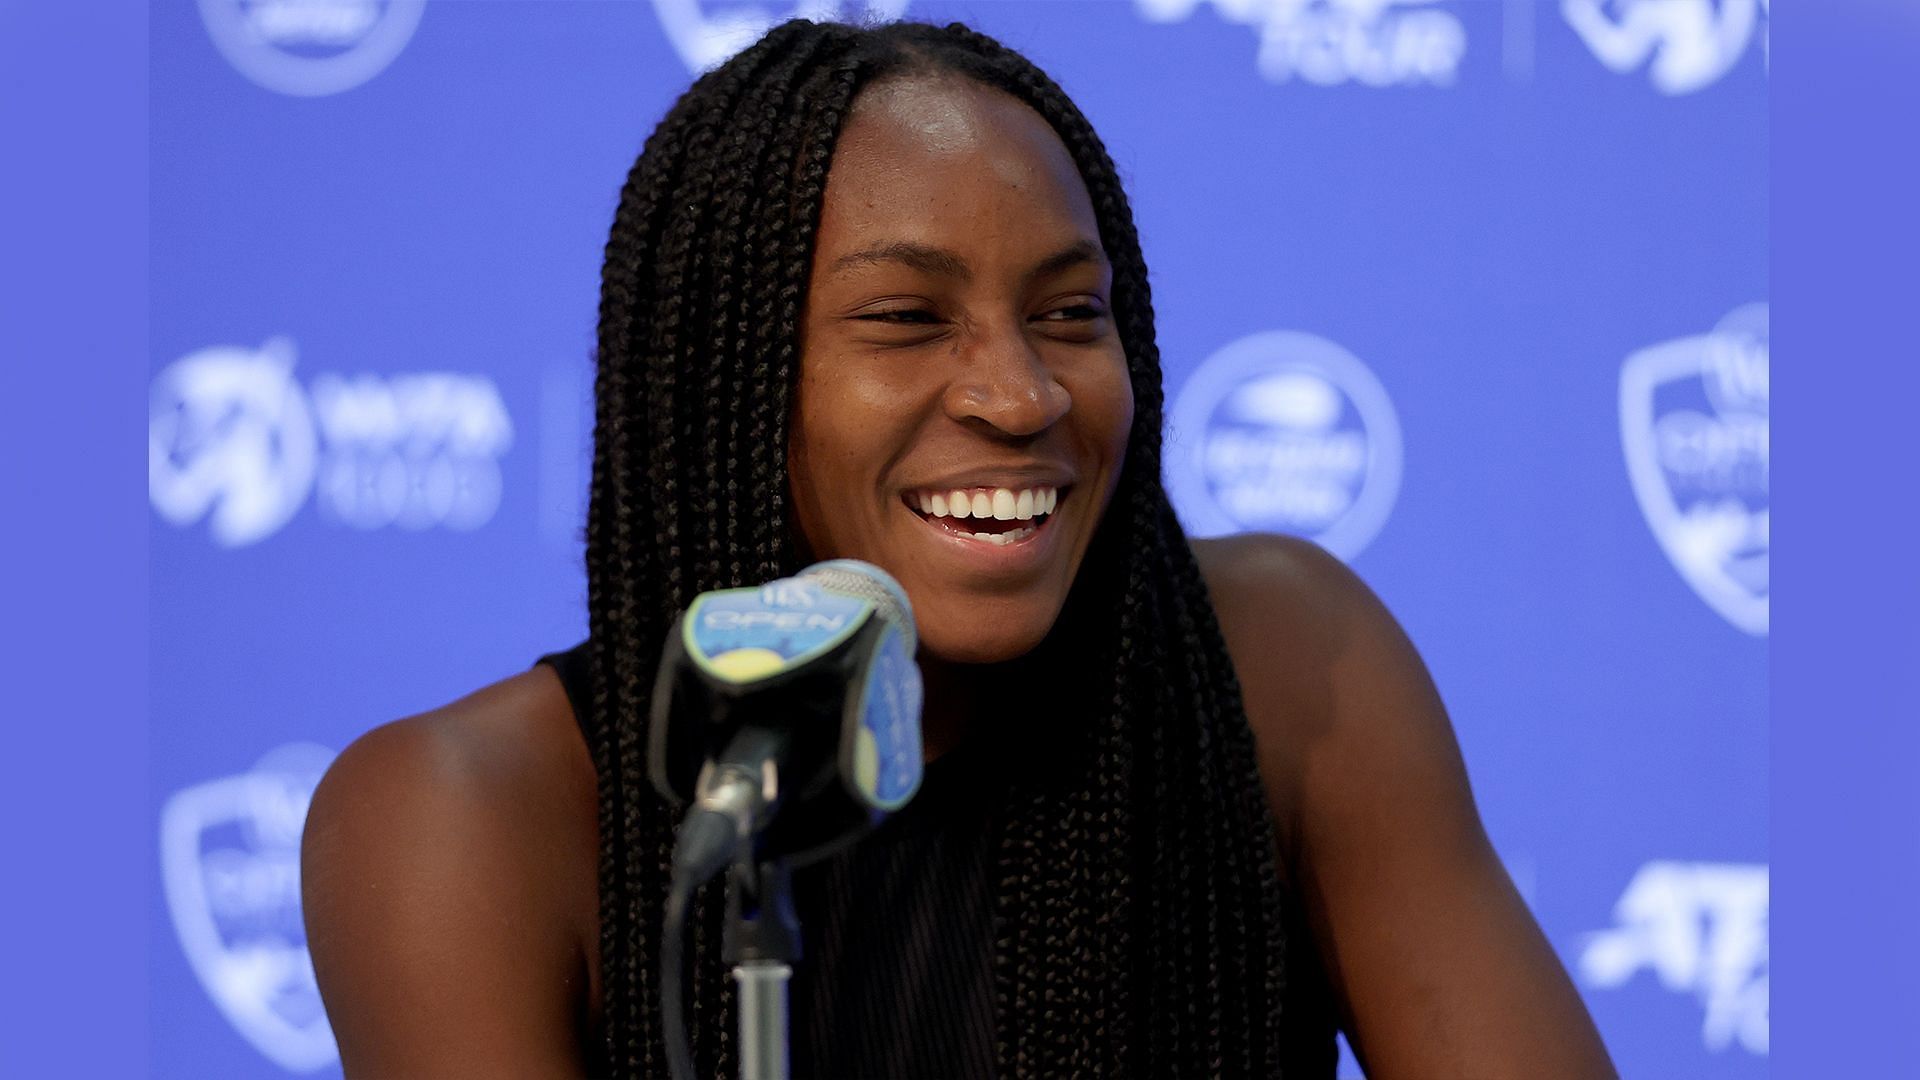 Coco Gauff shares her music listening stats